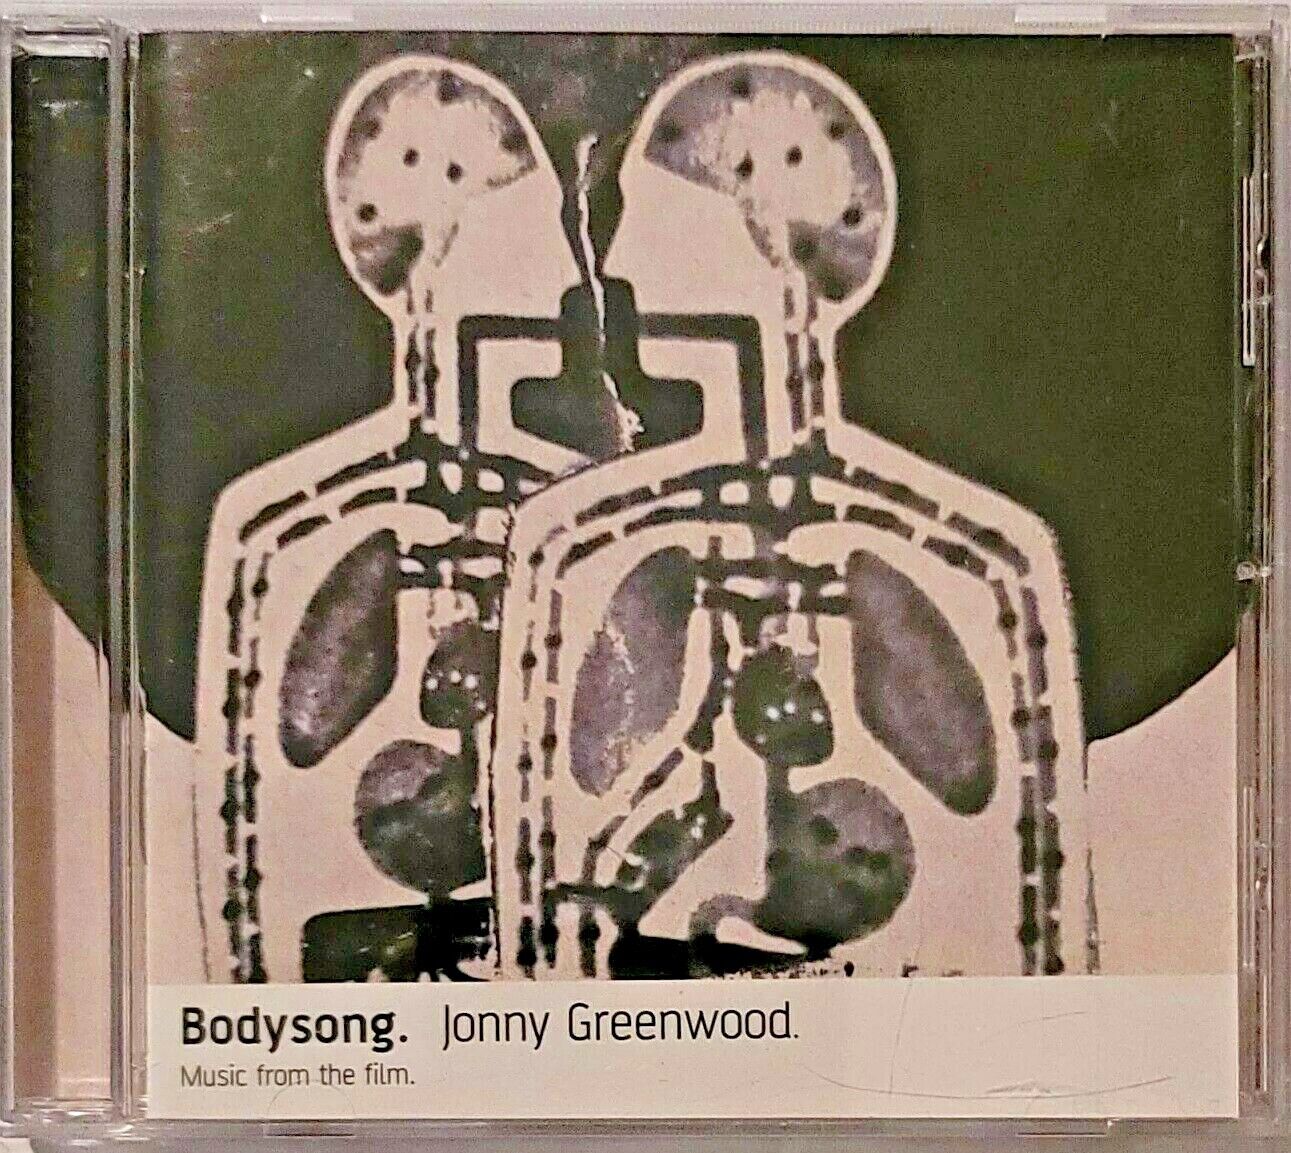 Bodysong (Music from the Film) by Jonny Greenwood (Guitar/Composer 